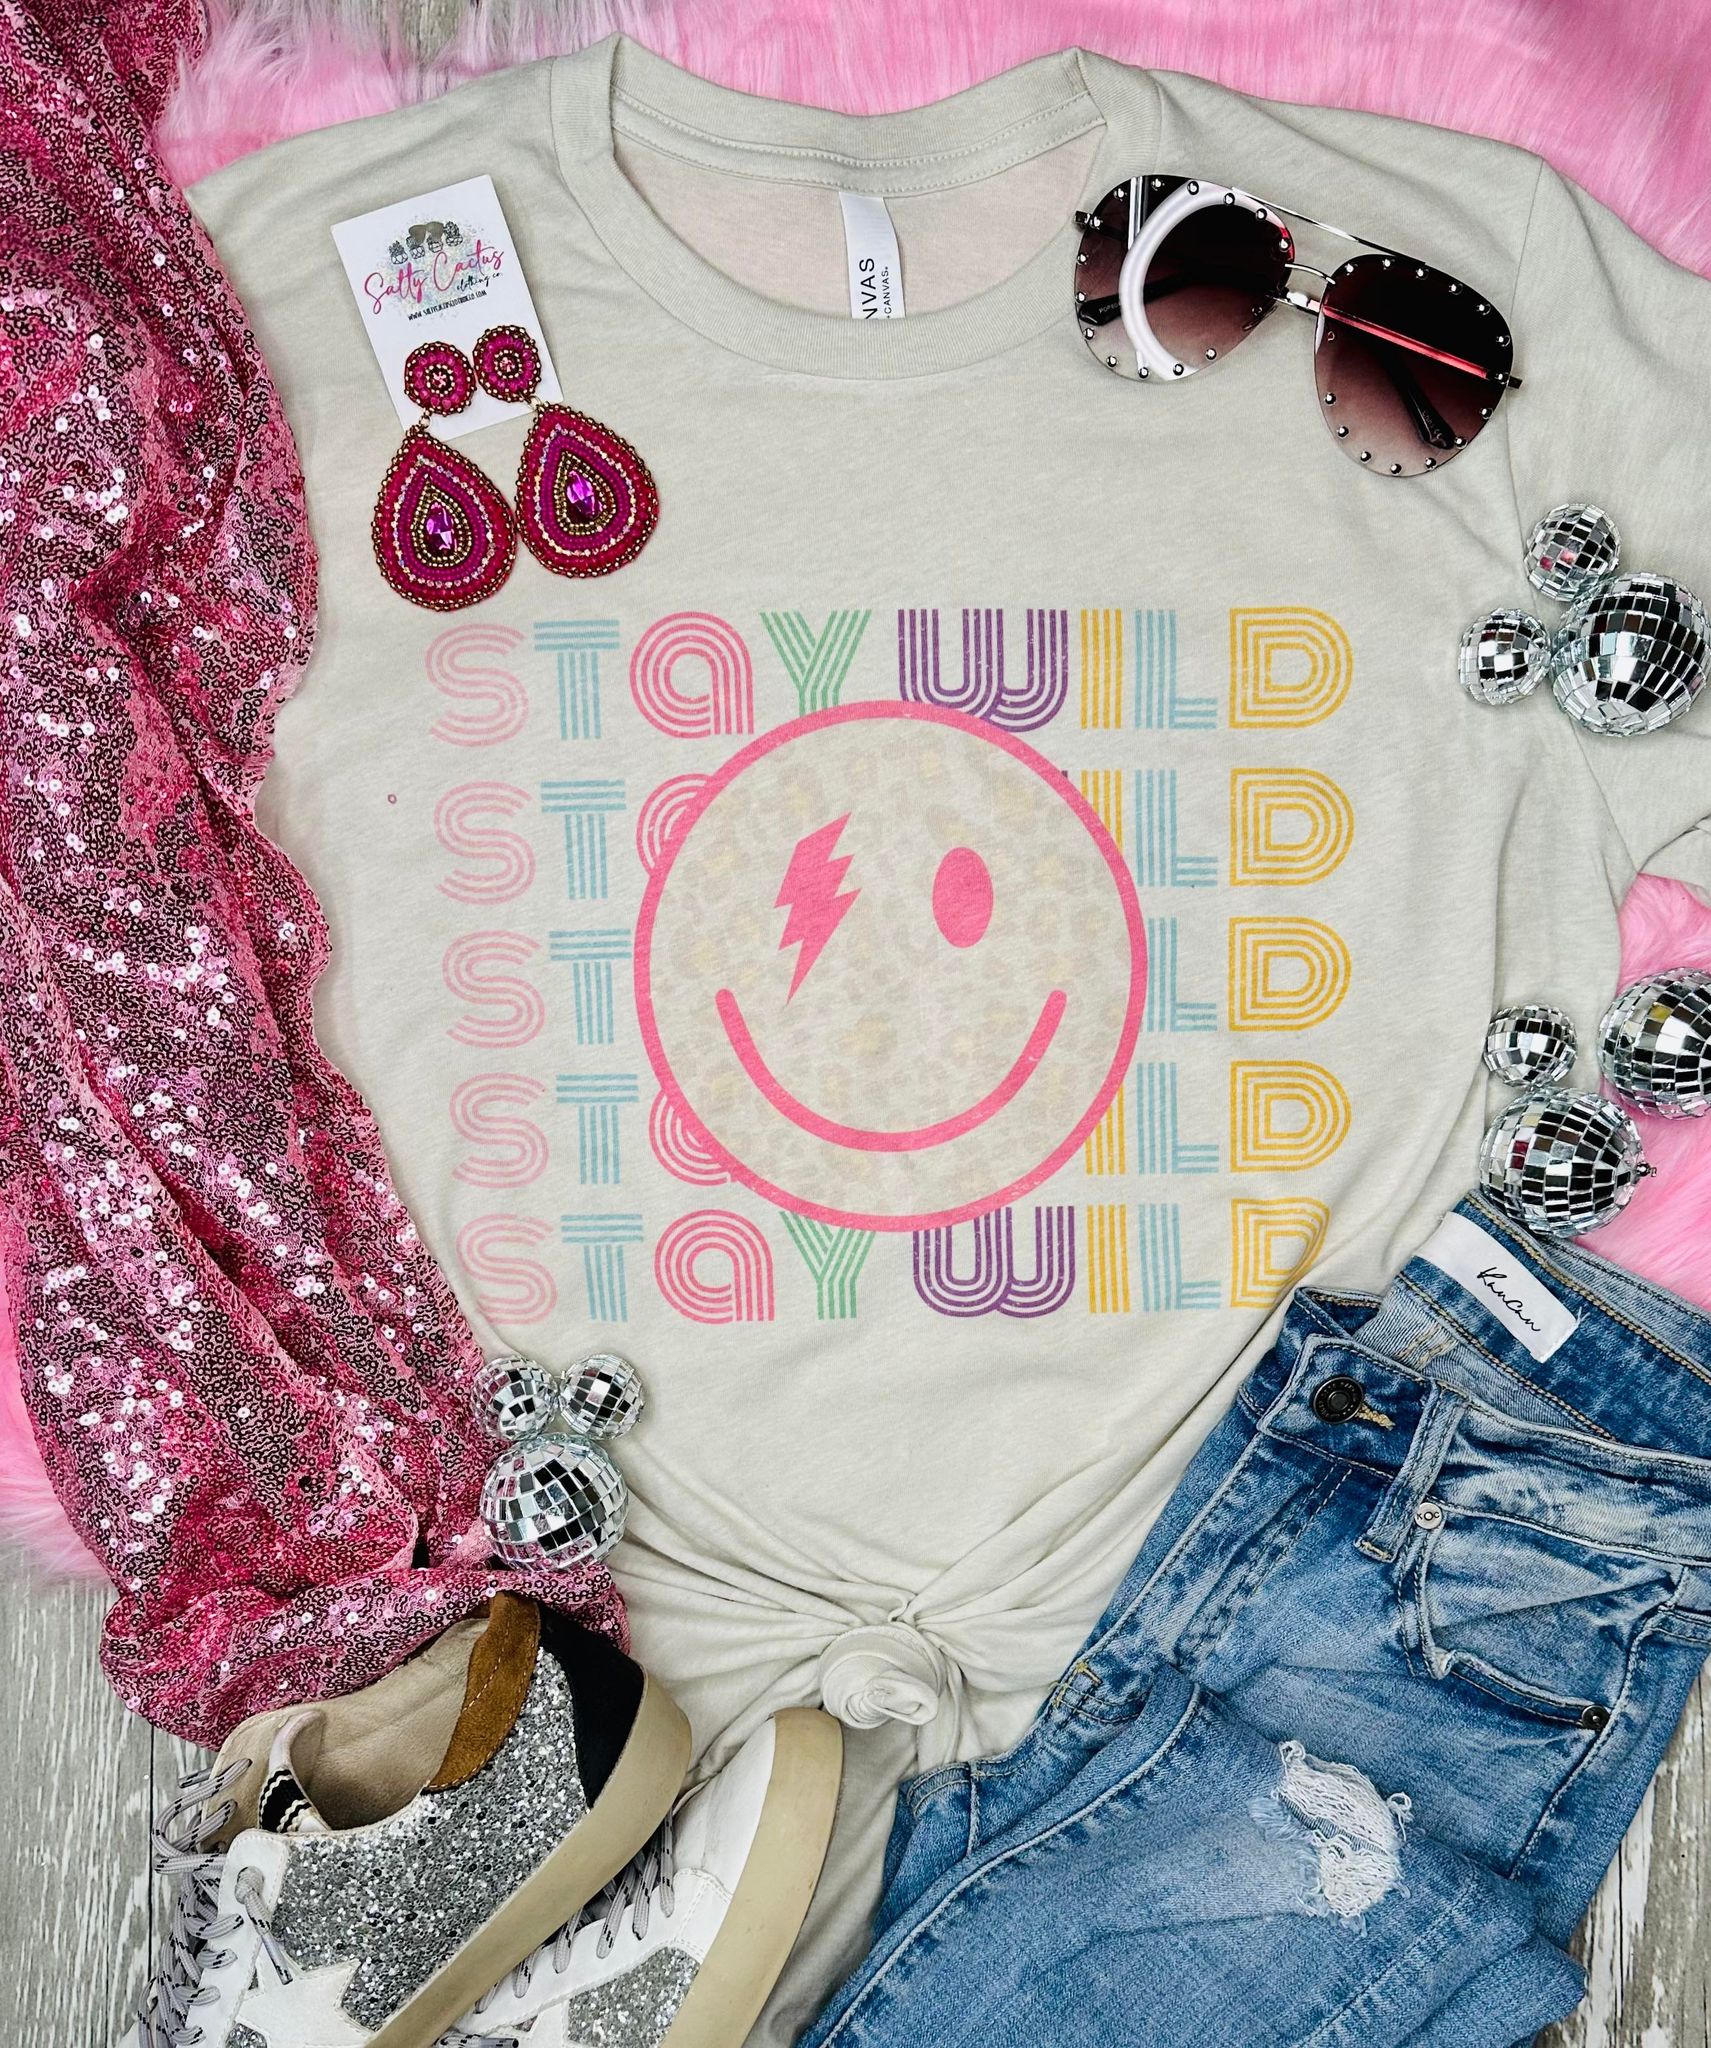 Stay Wild Stacked Smiley Stone Tee